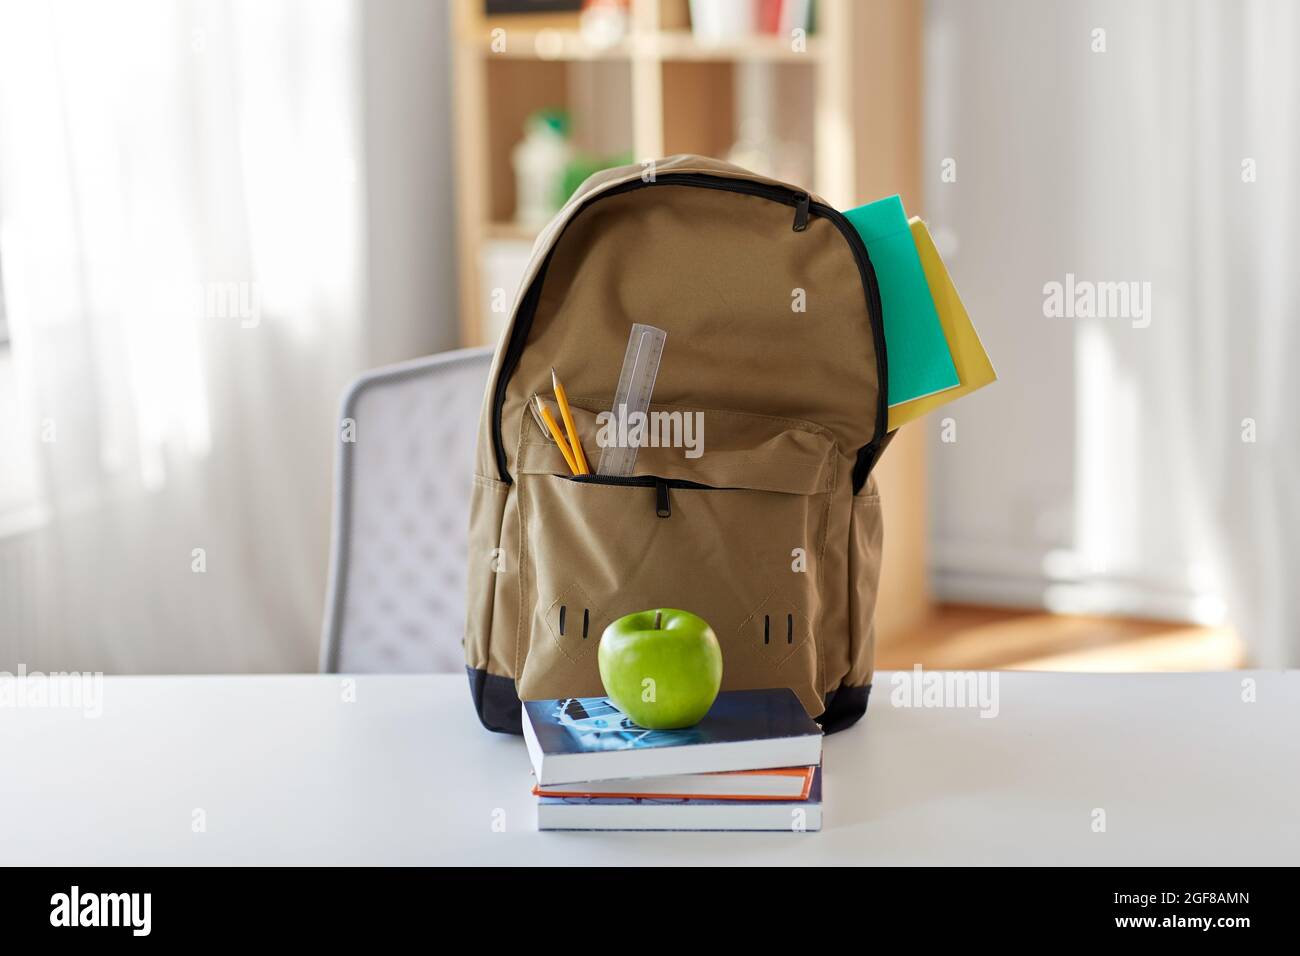 school backpack with books and apple on table Stock Photo